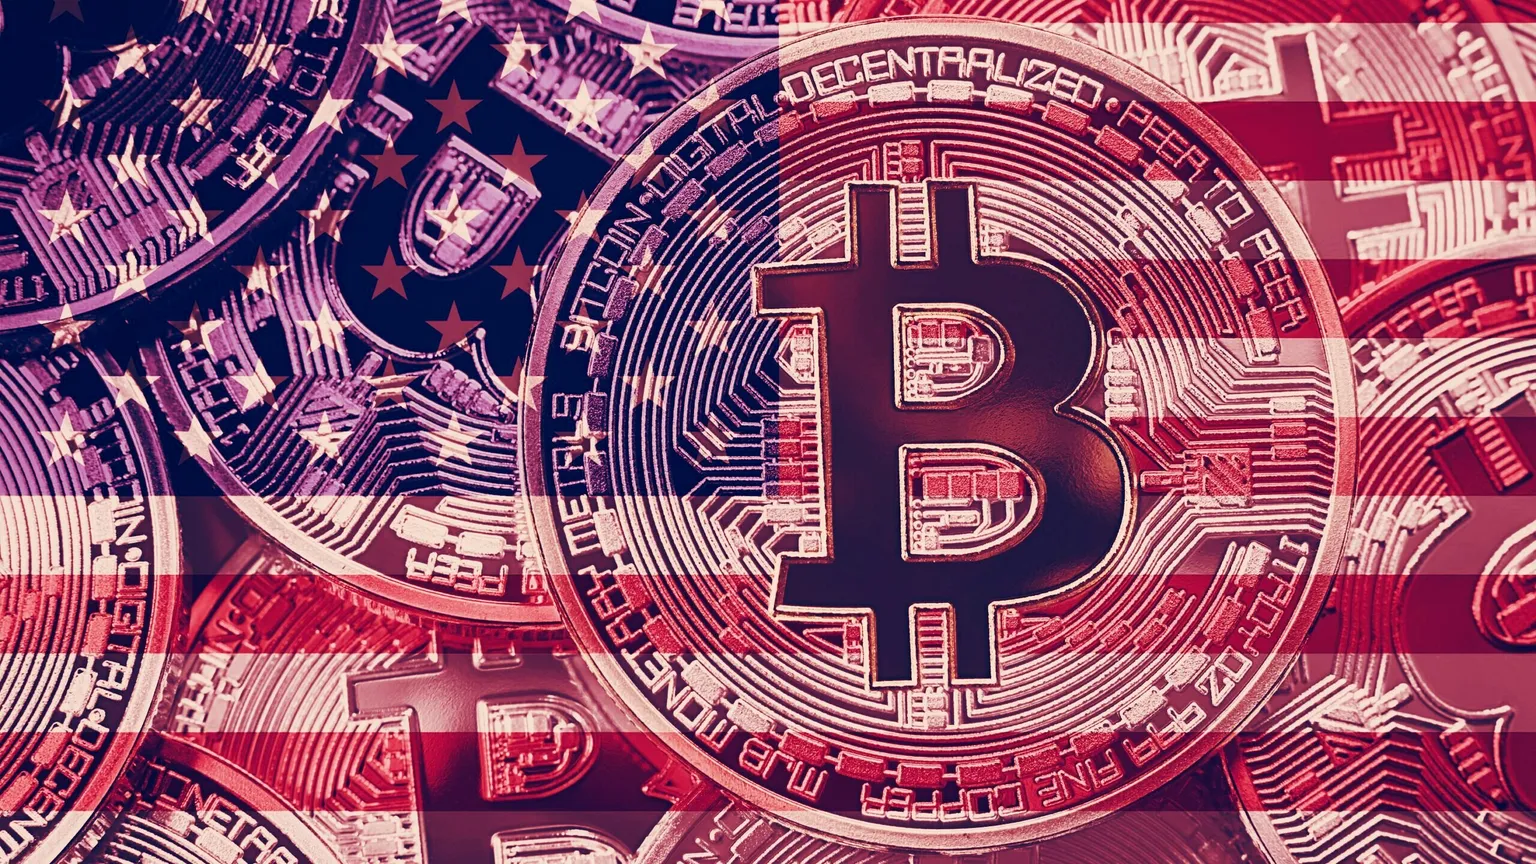 The US flag over a Bitcoin image. Image: Shutterstock.